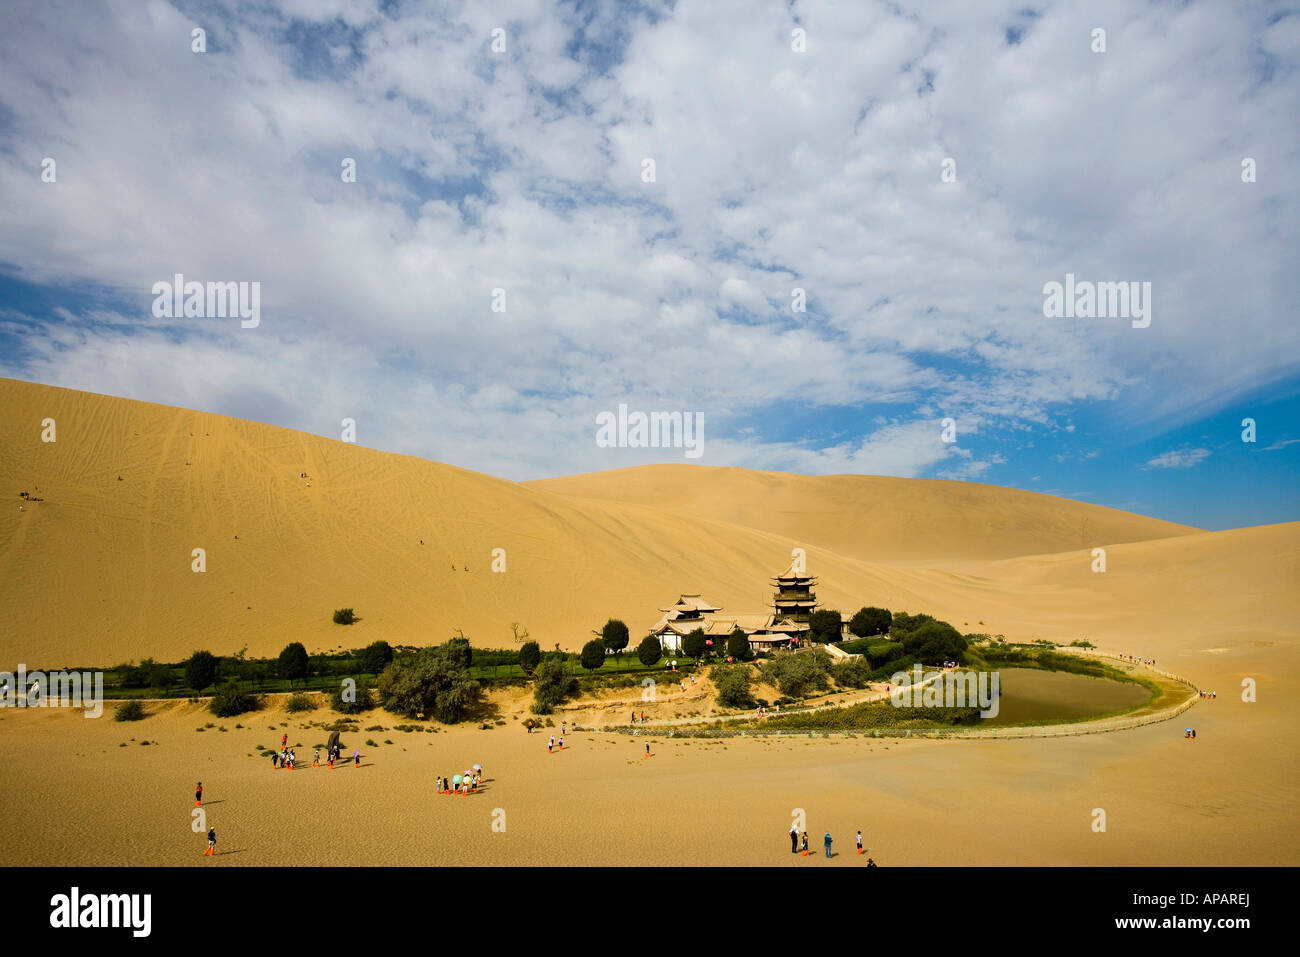 Infrequent Oasis in the Desert Stock Photo